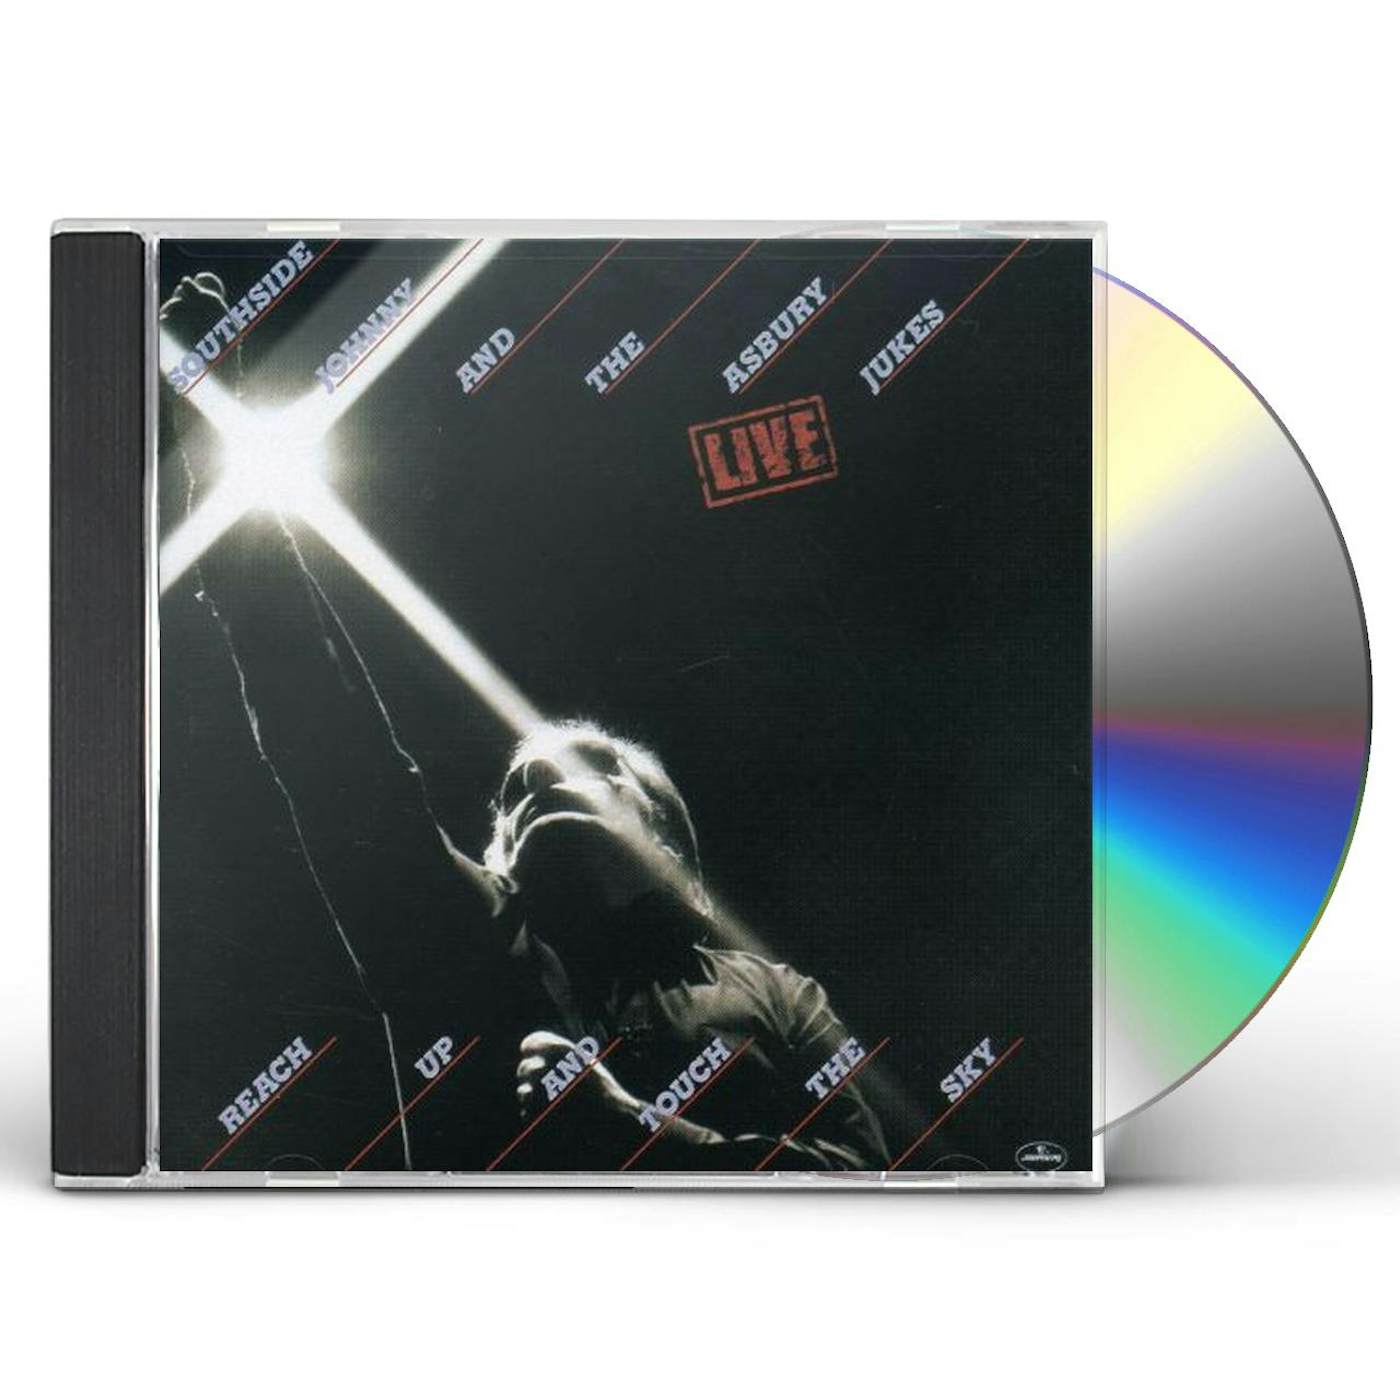 Southside Johnny And The Asbury Jukes LIVE: REACH UP & TOUCH THE SKY CD